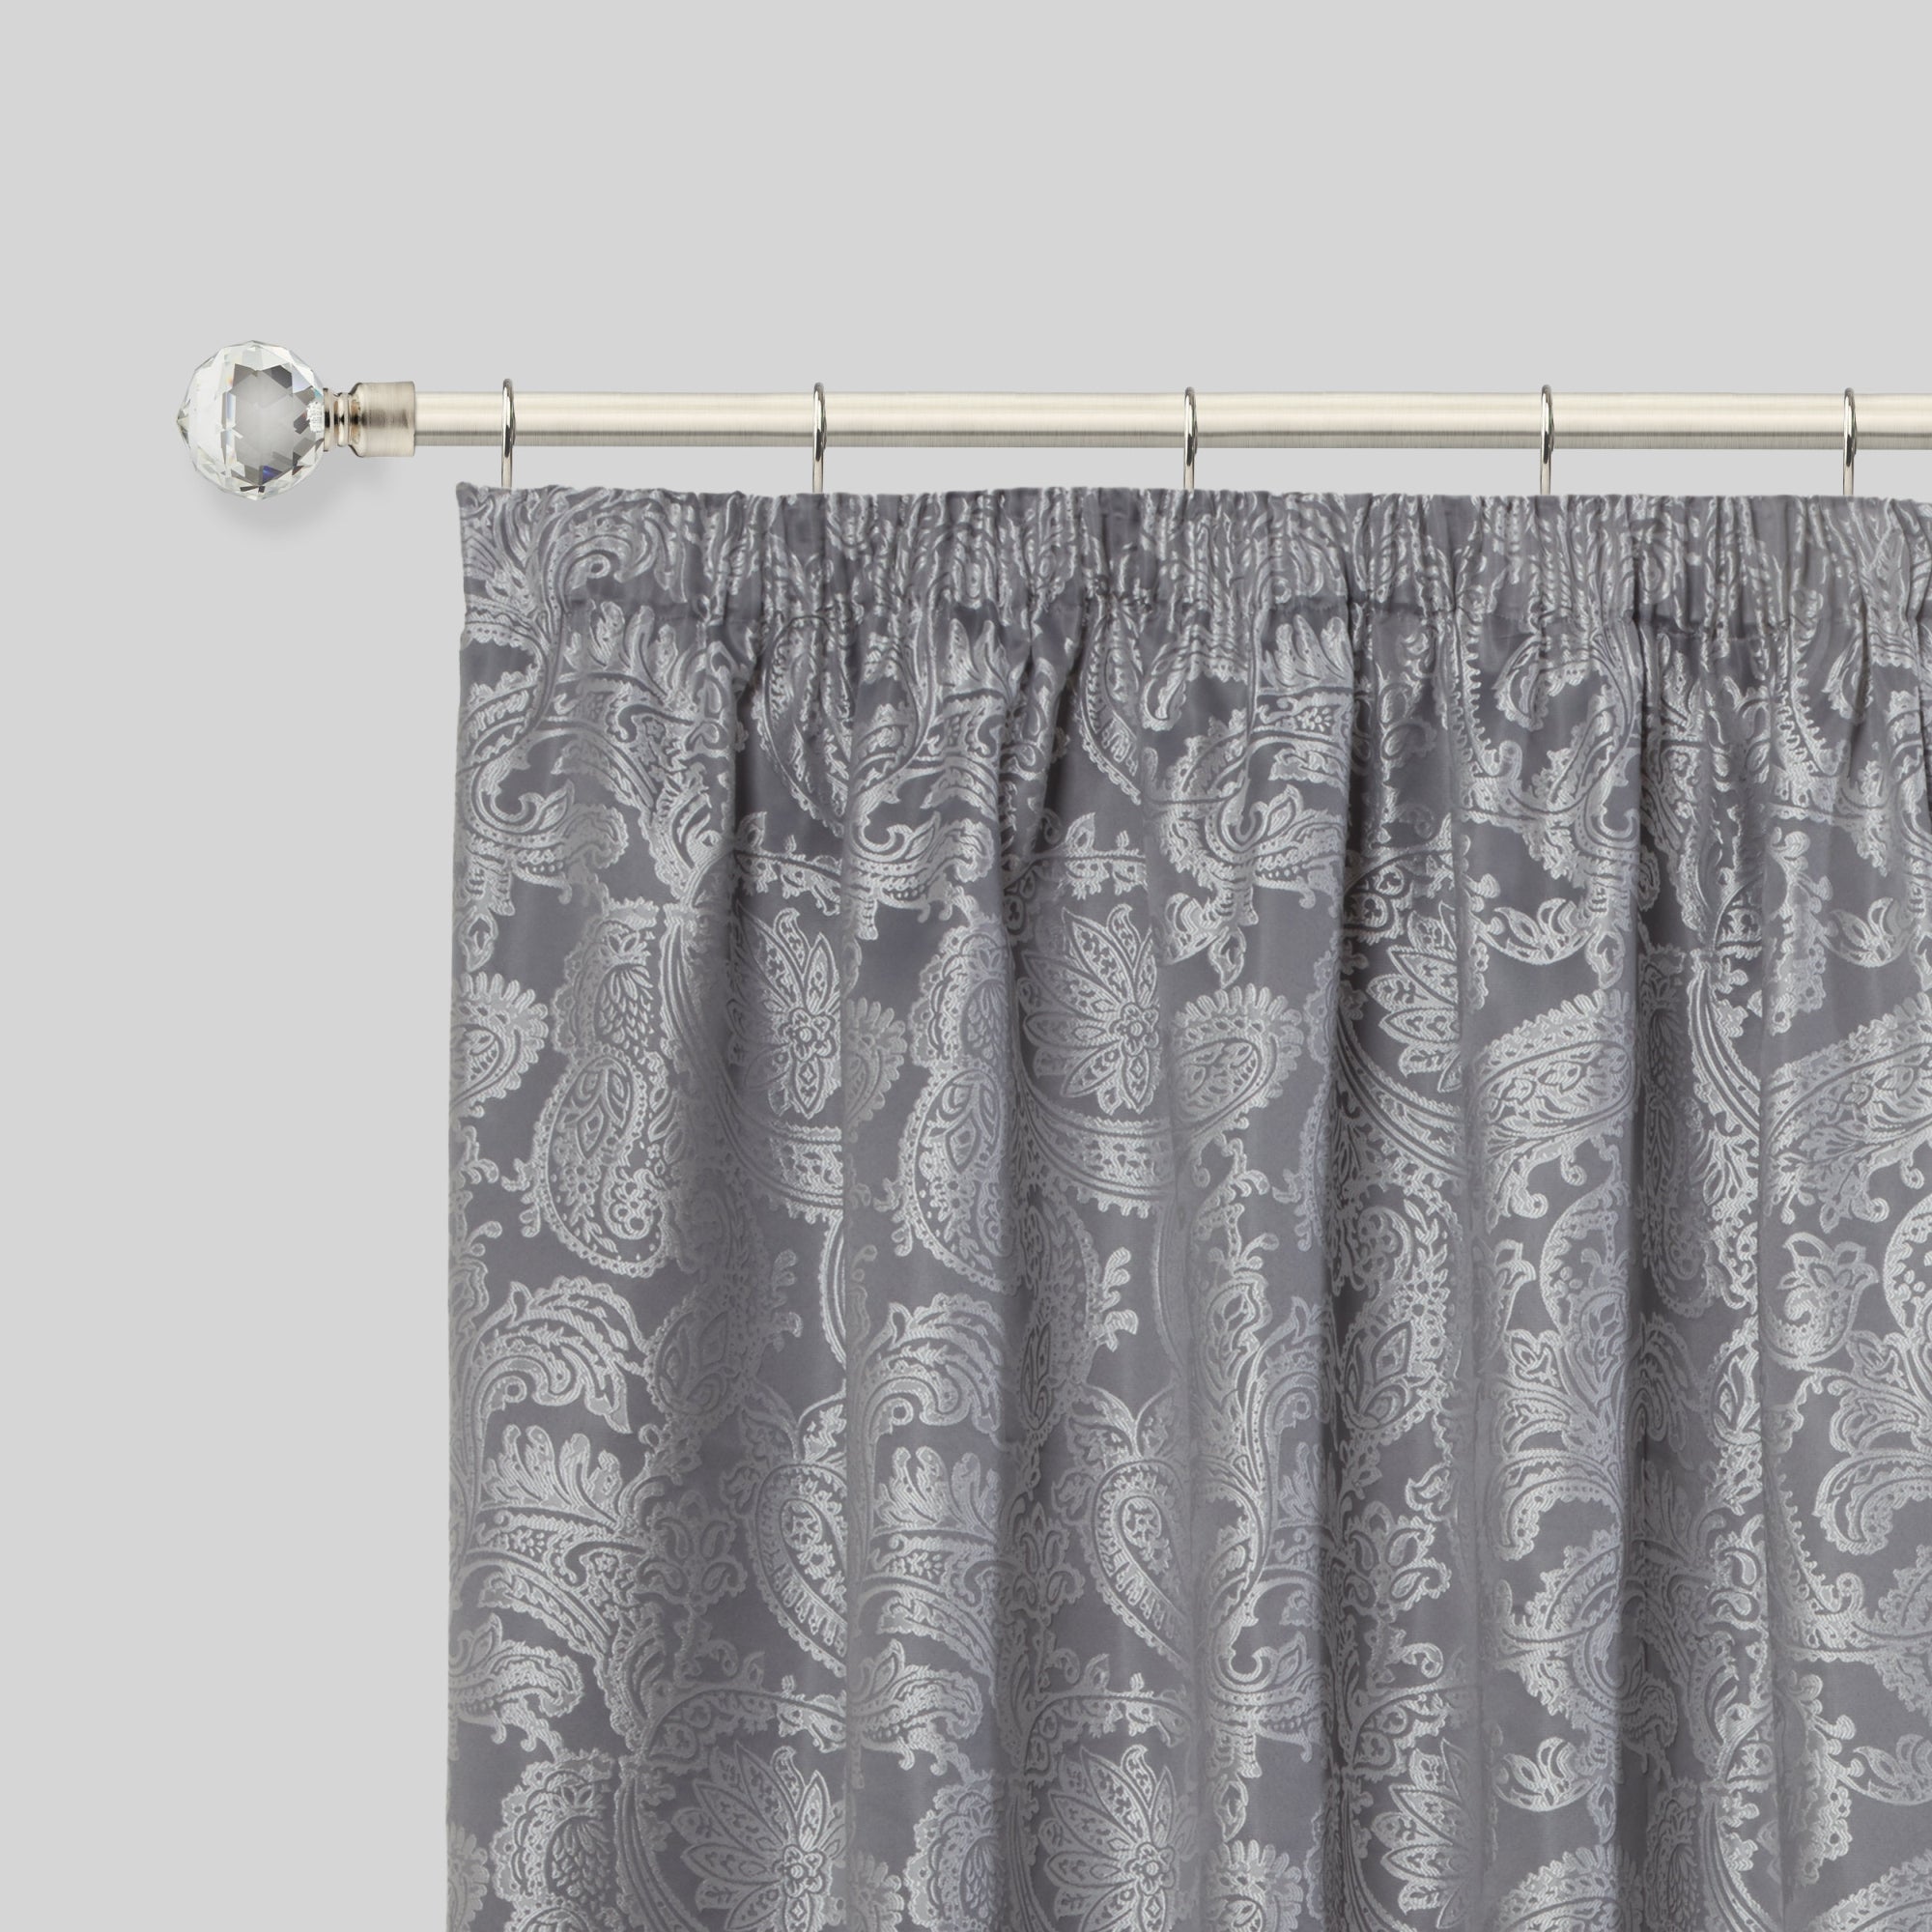 Crystal - Extendable Curtain Pole with Rings and Pair of End Finials in Brushed Silver - 1.6 - 3m